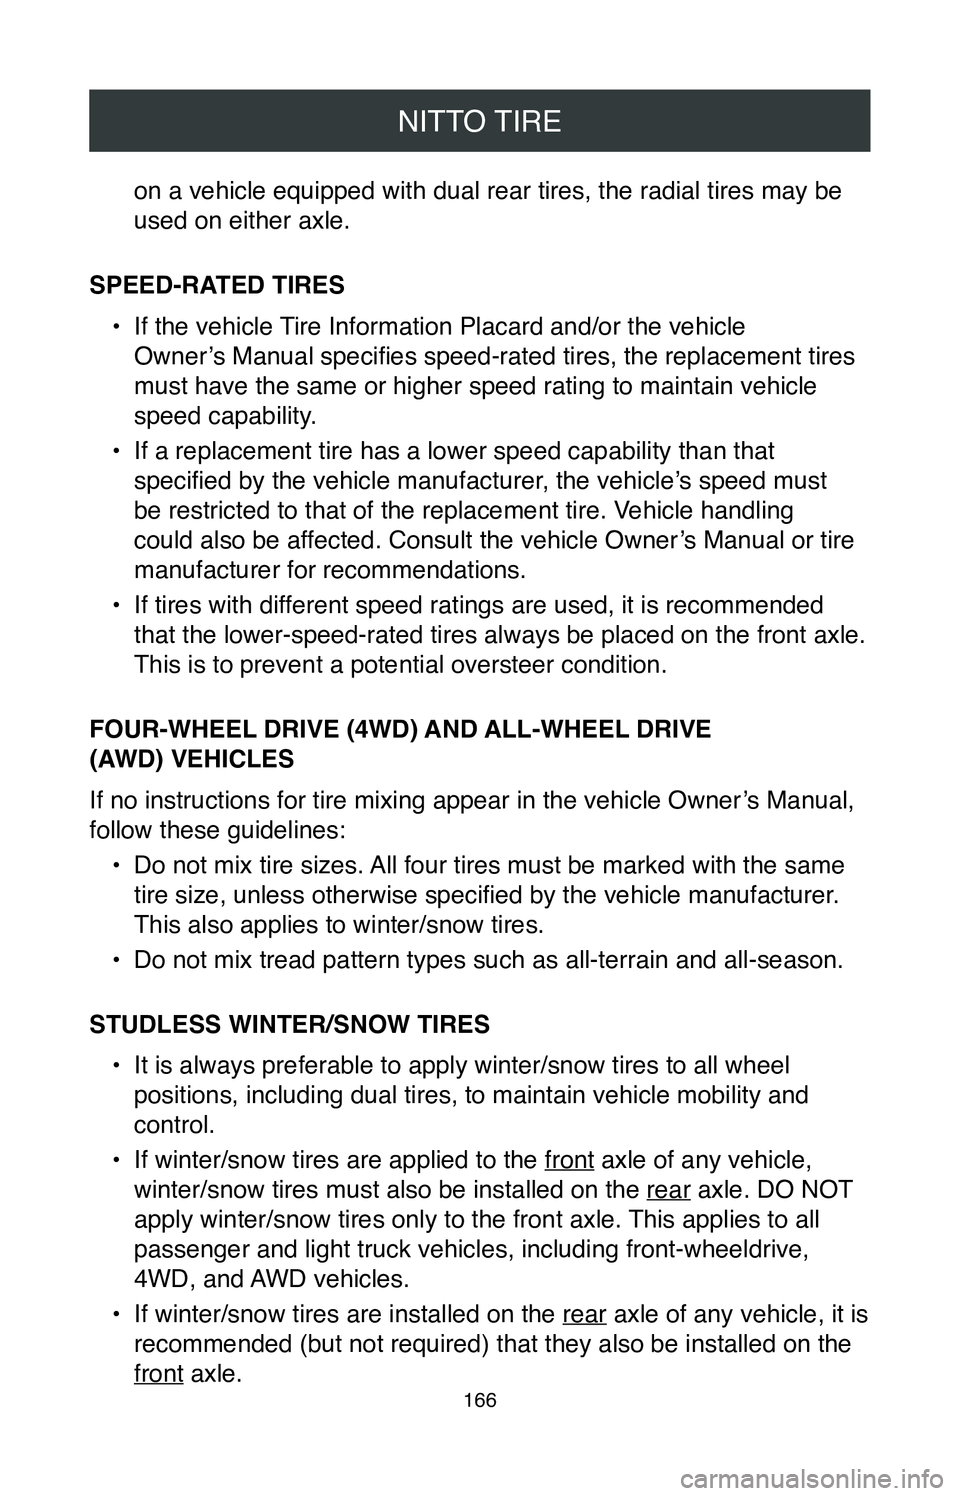 TOYOTA COROLLA HYBRID 2020  Warranties & Maintenance Guides (in English) NITTO TIRE
166
on a vehicle equipped with dual rear tires, the radial tires may be 
used on either axle.
SPEED-RATED TIRES •
 If the vehicle Tire Information Placard and/or the vehicle  
Owner’s M